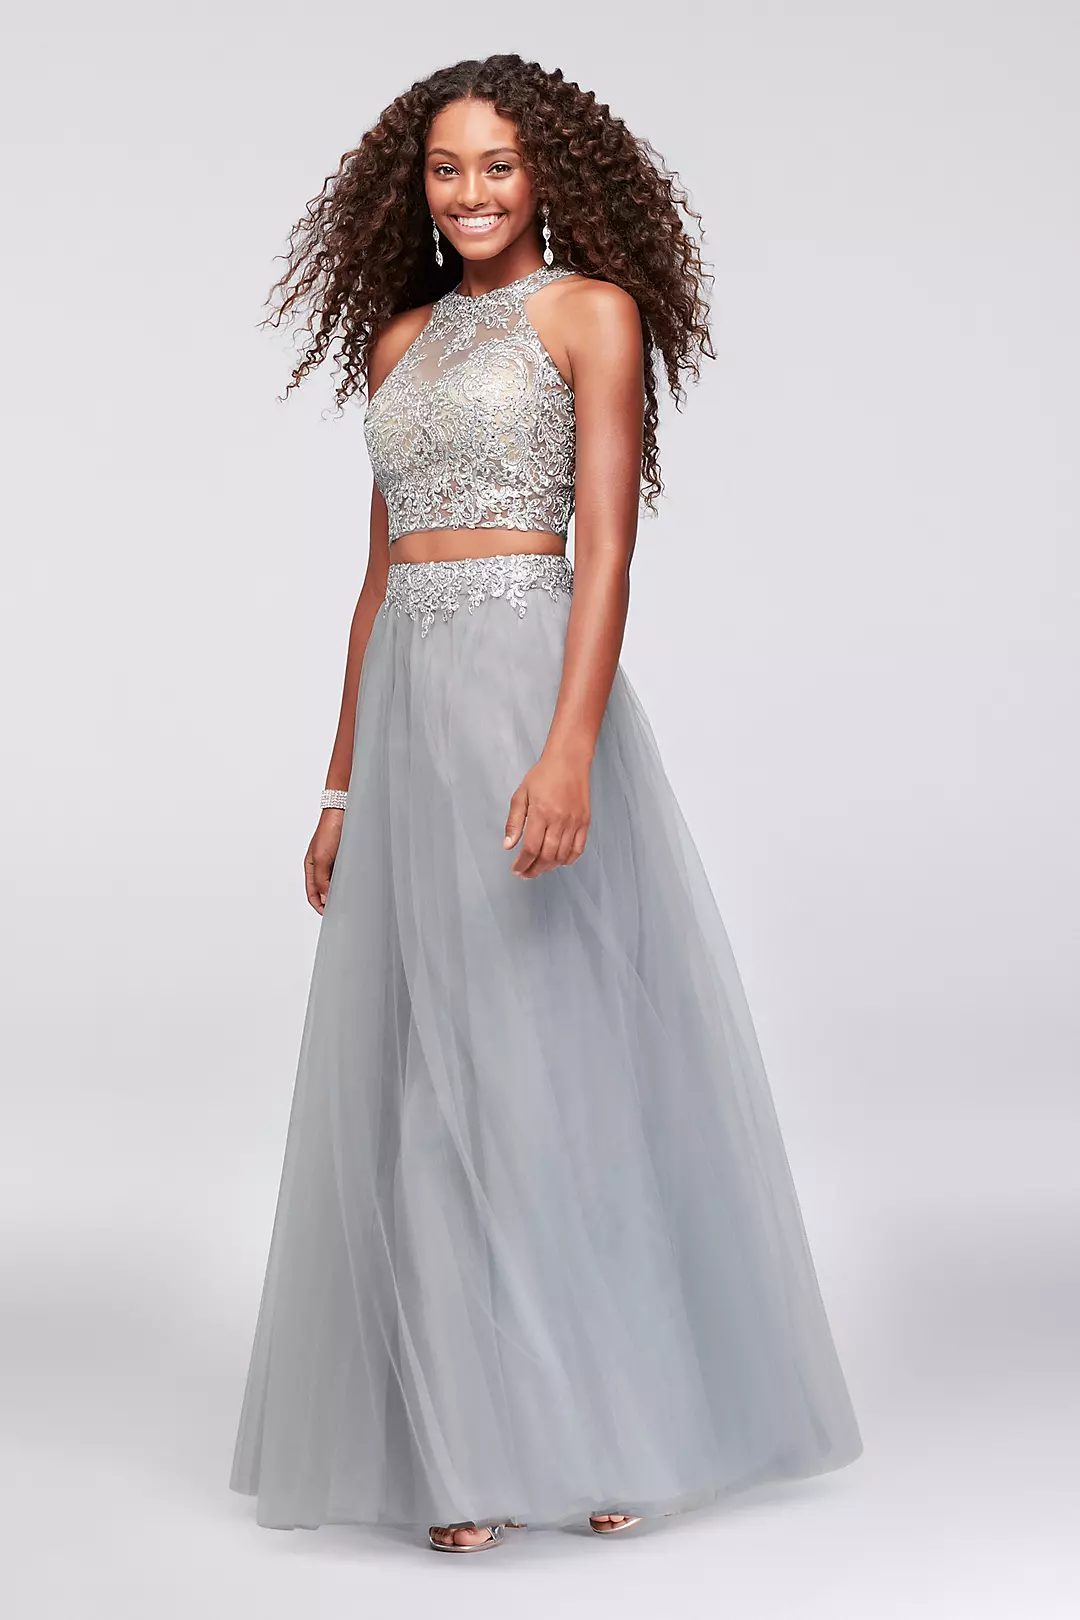 Corded Lace and Tulle Two-Piece Ball Gown Image